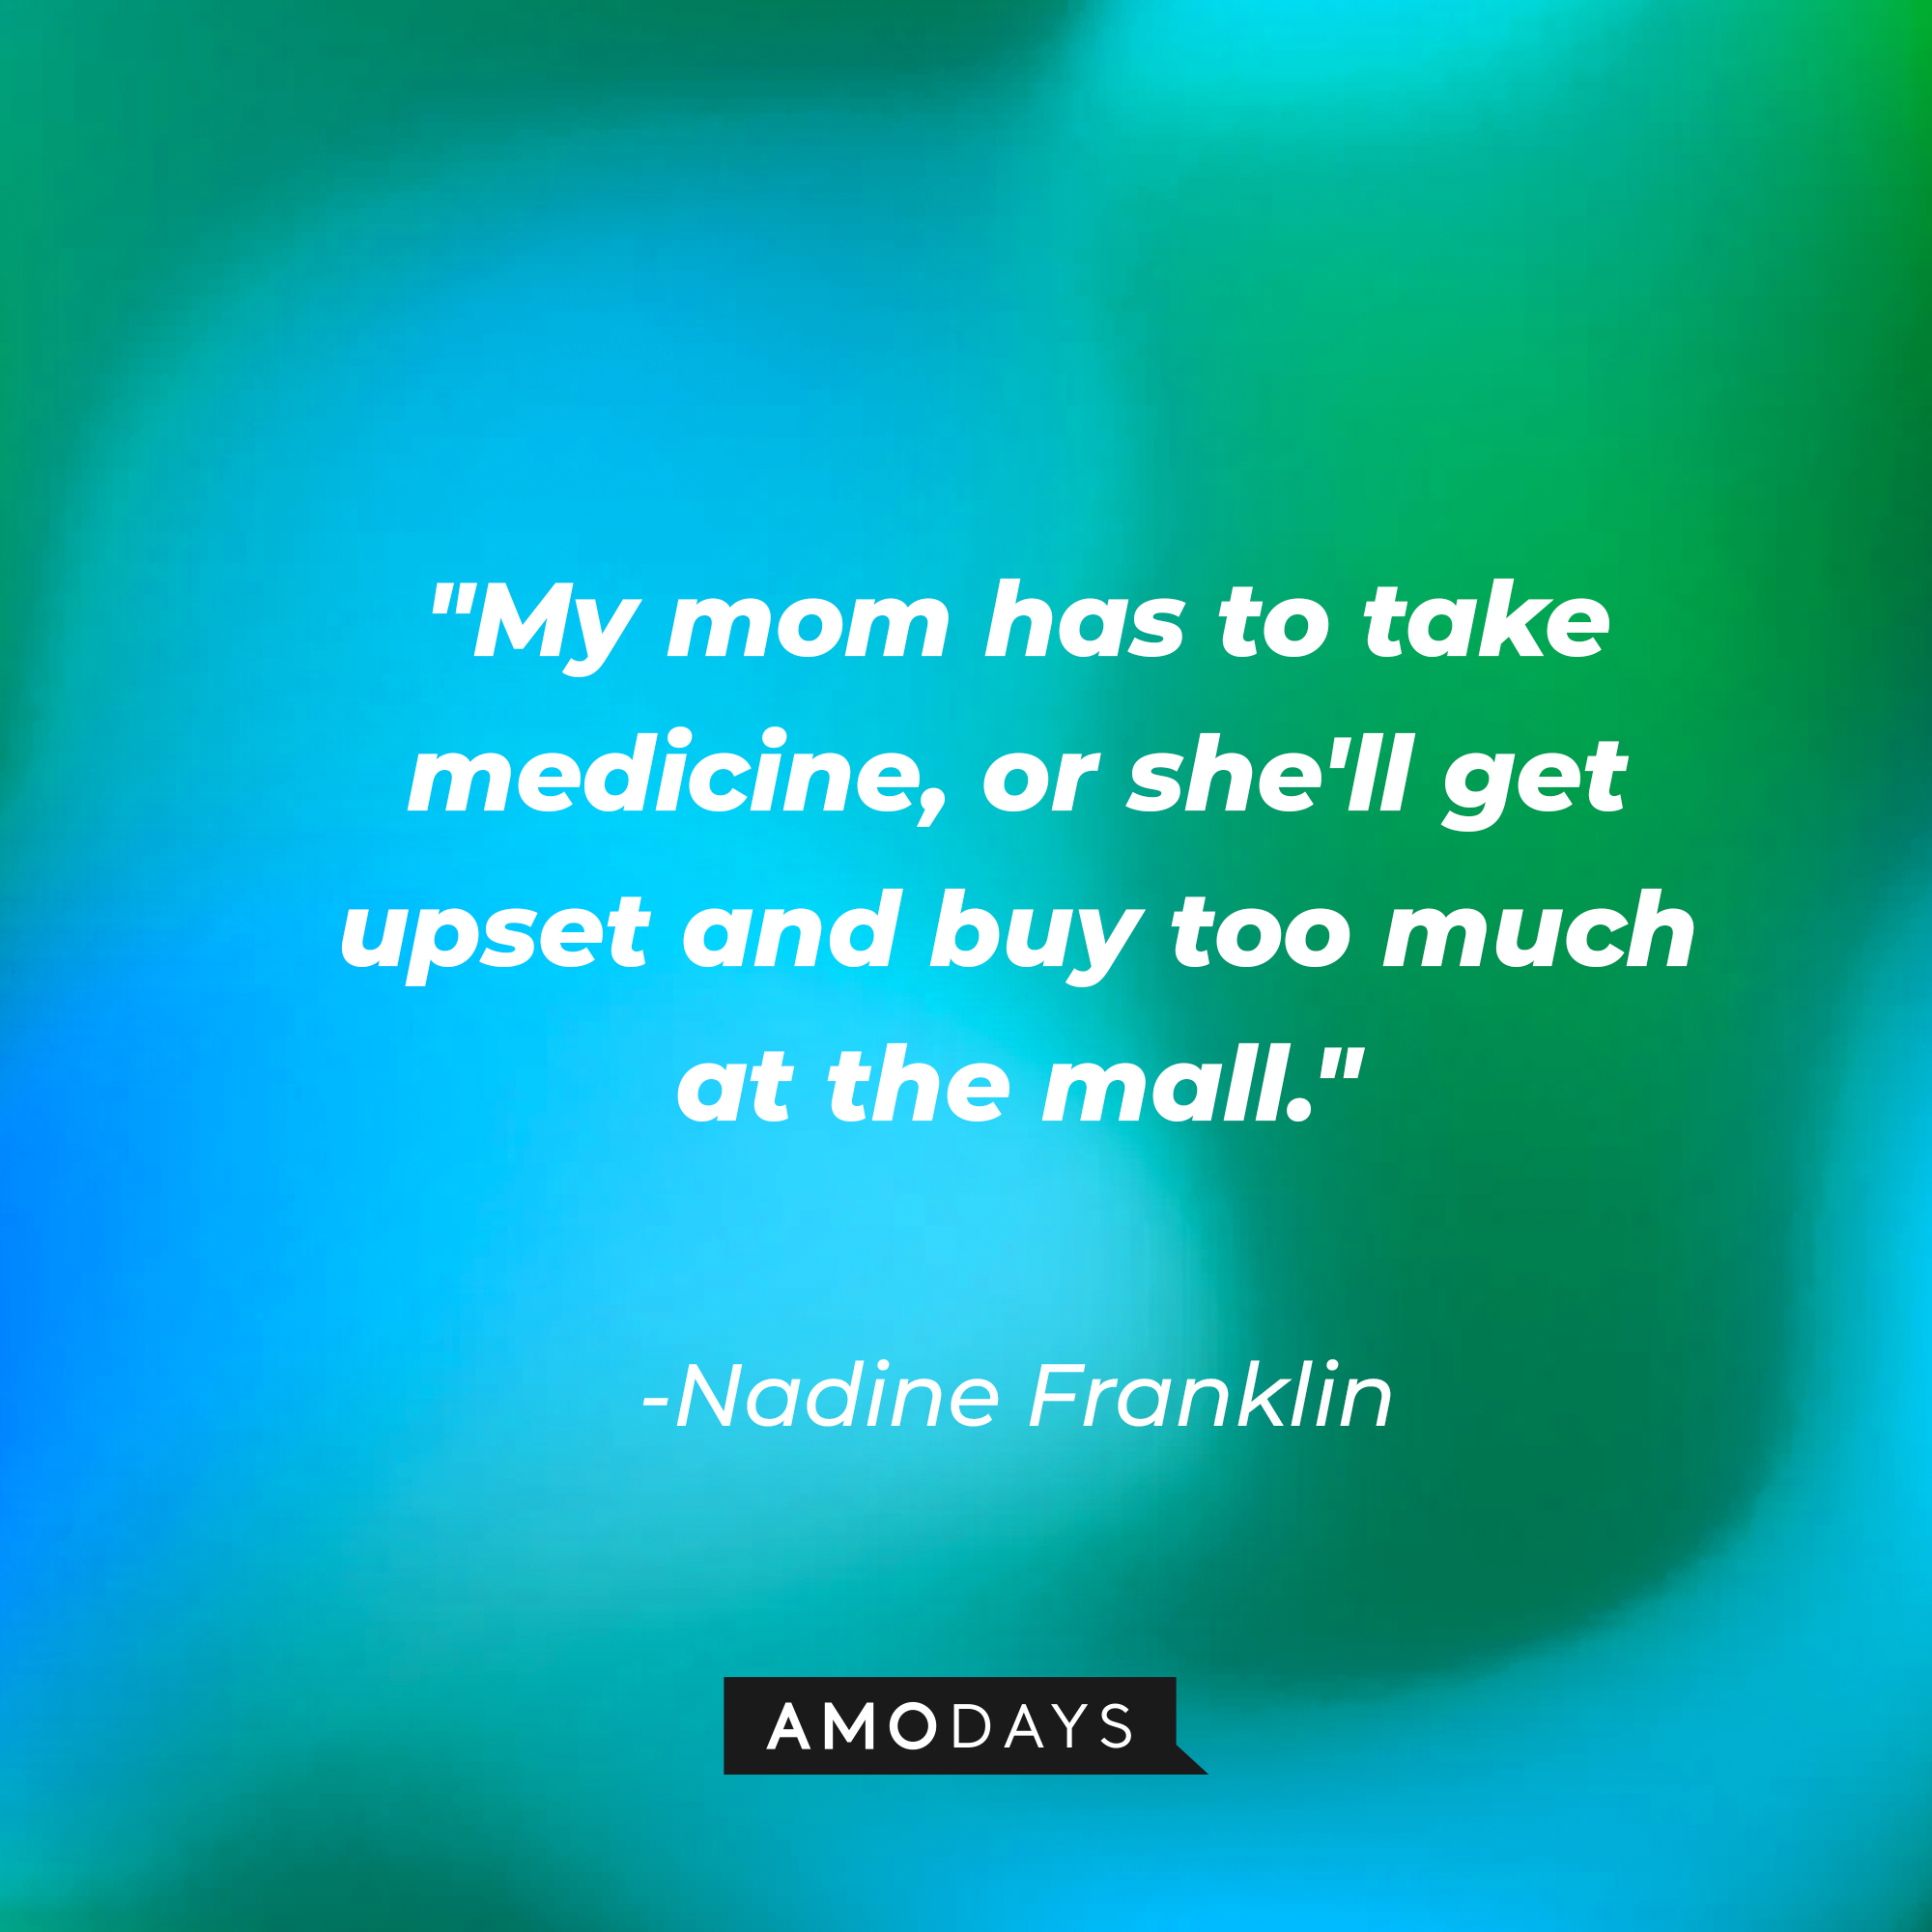 Nadine Franklin's quote: "My mom has to take medicine, or she'll get upset and buy too much at the mall." | Source: AmoDays